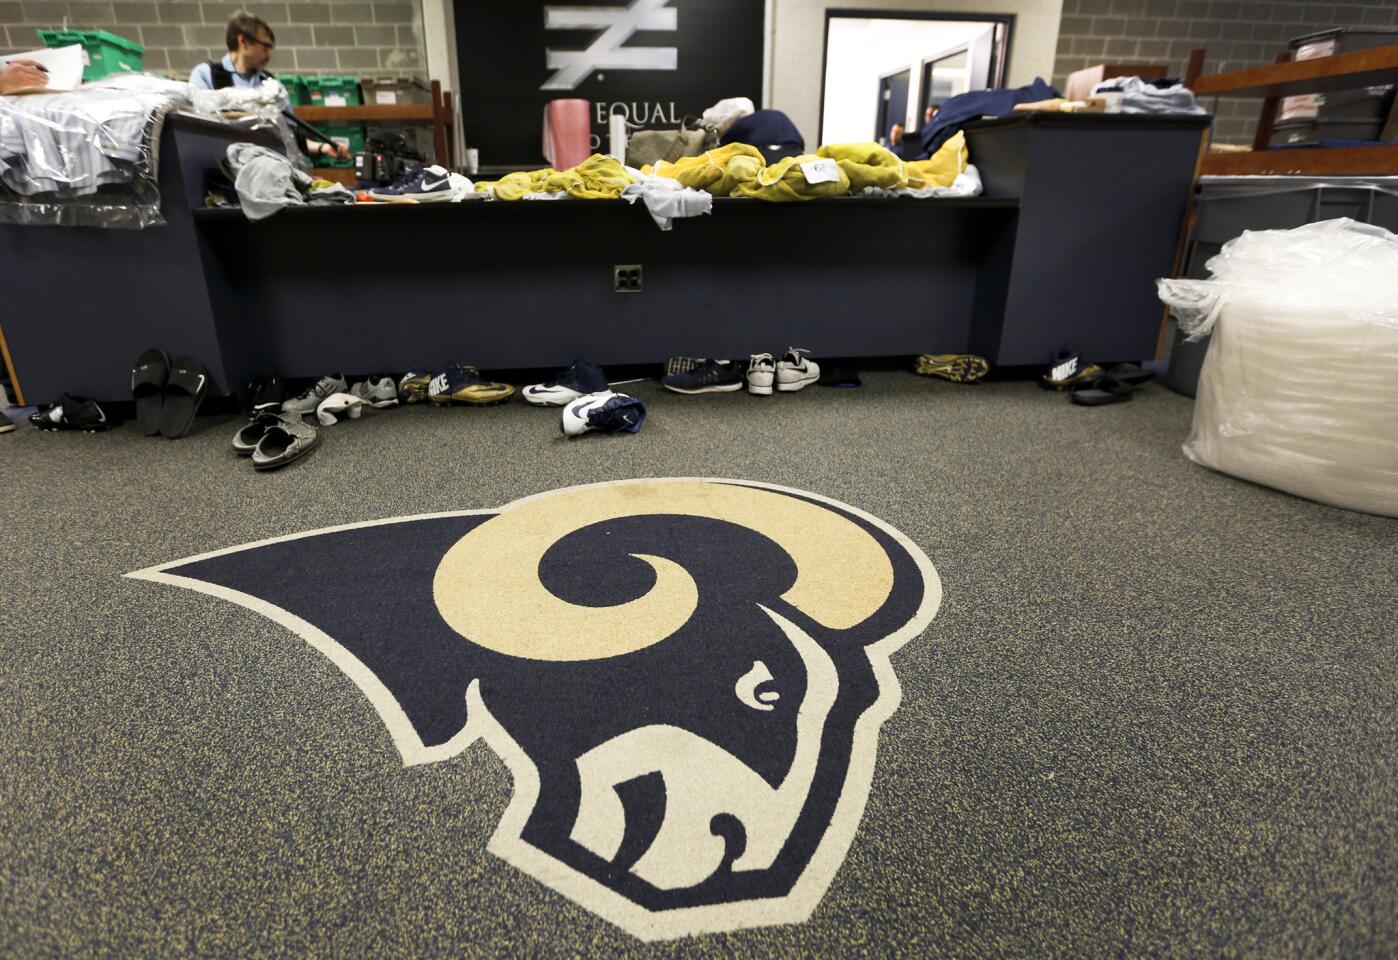 Rams' temporary offices in Agoura Hills are open for (non-football) business